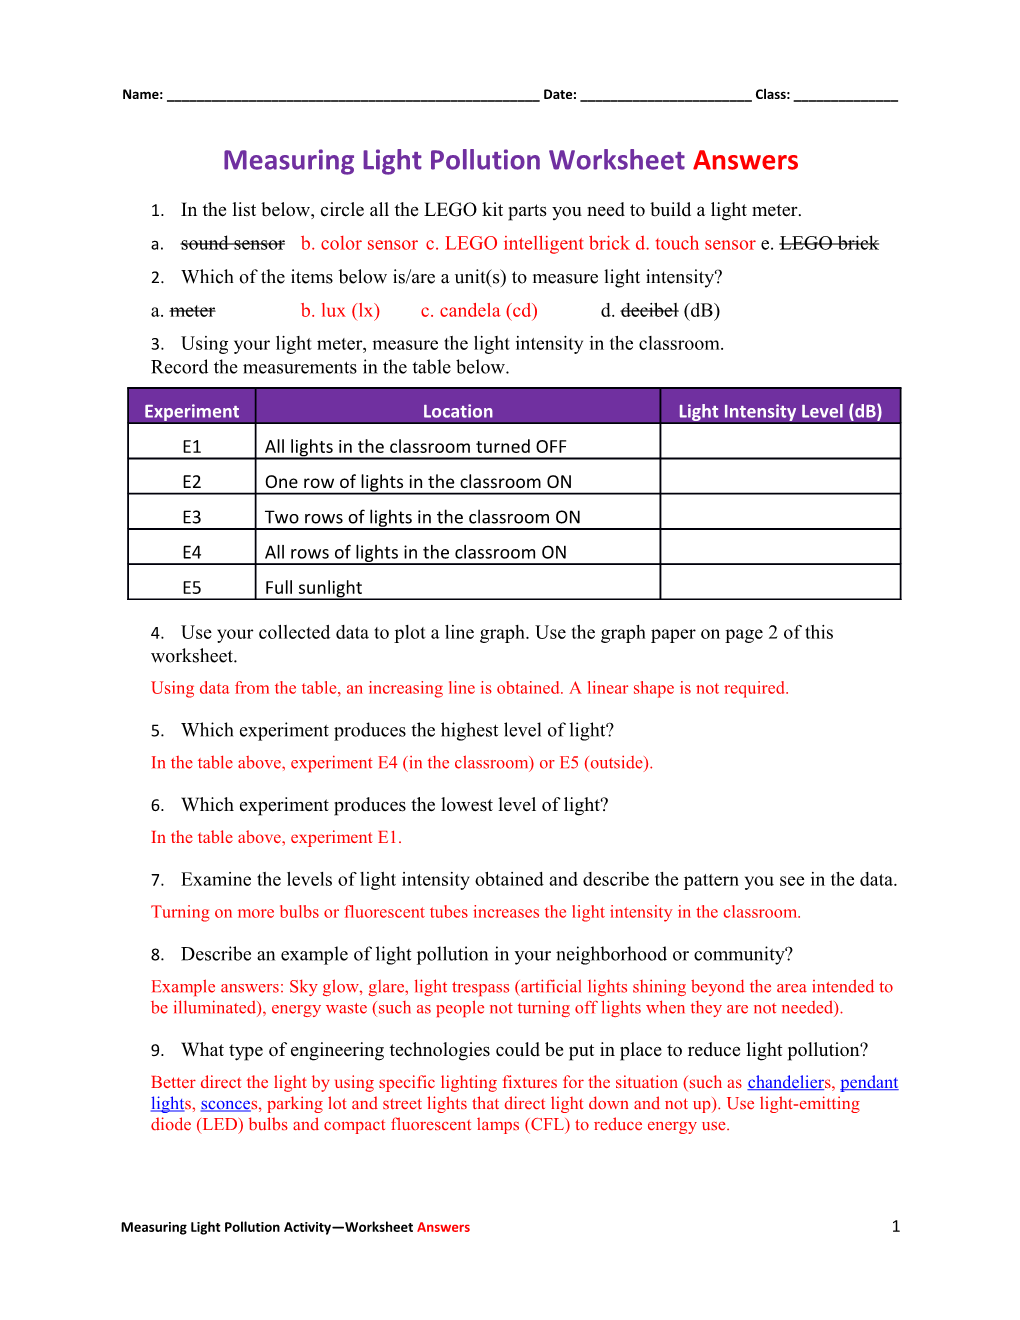 Measuring Light Pollution Worksheet Answers